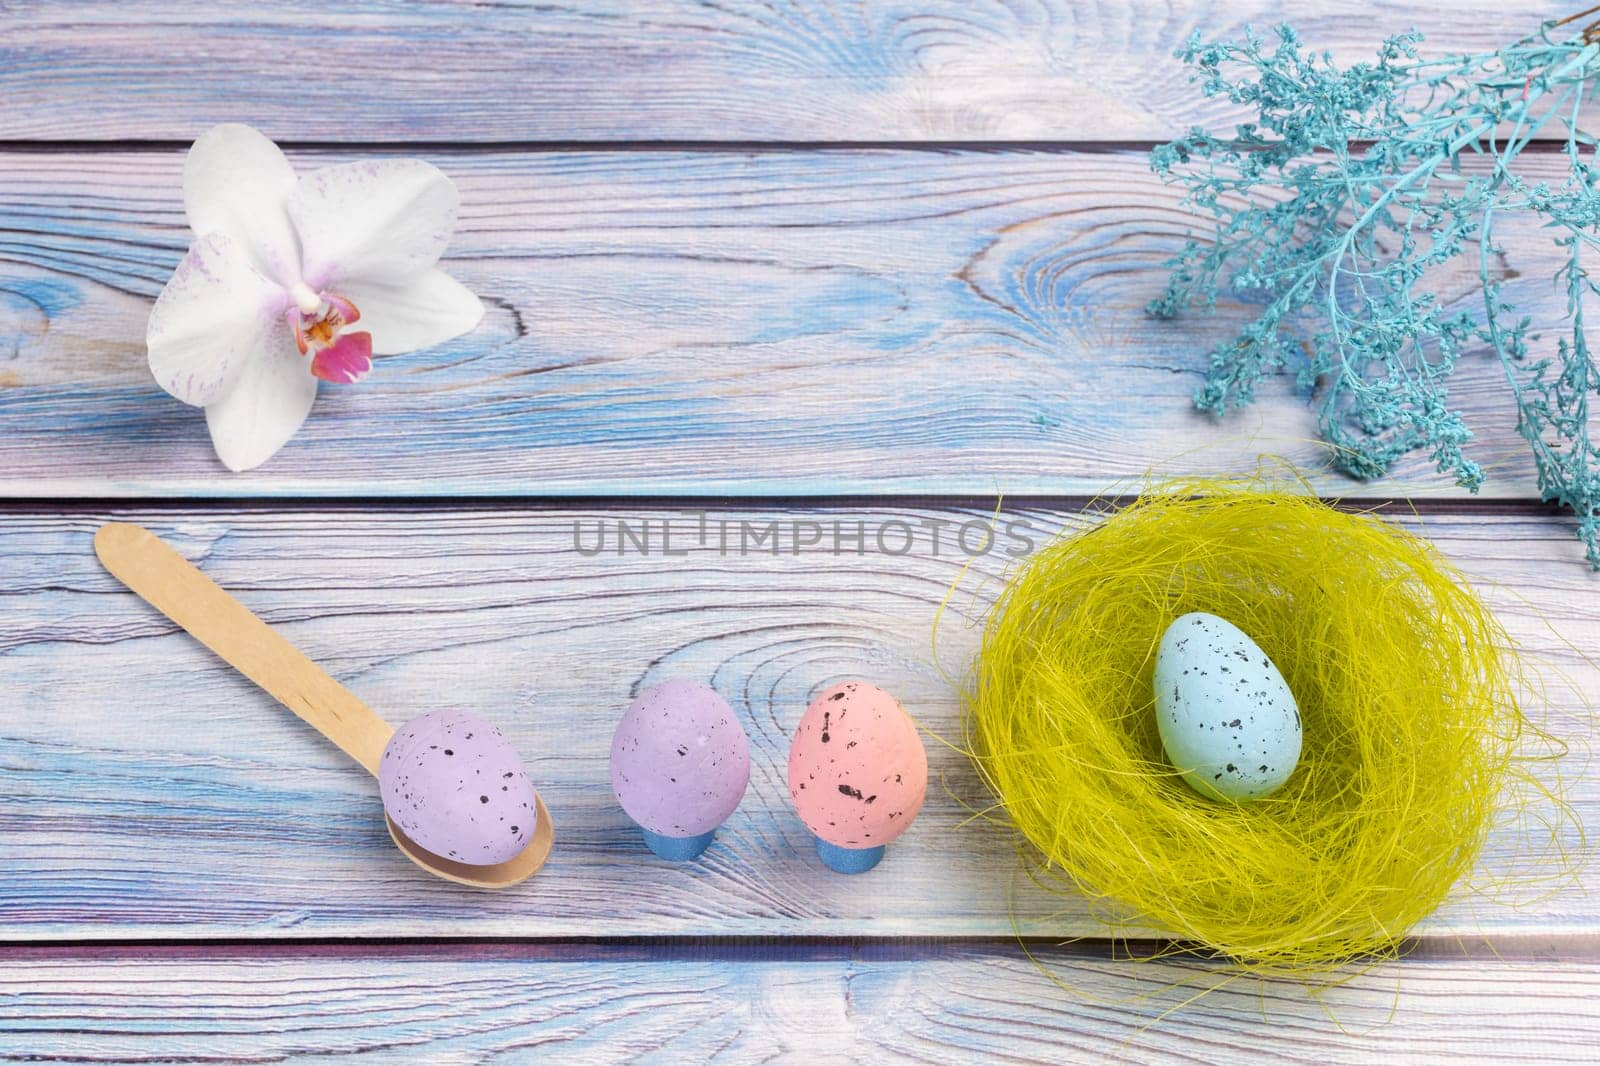 Nest with a colored Easter egg, an orchid flower and a wooden spoon on the boards with decorative plants. Top view.